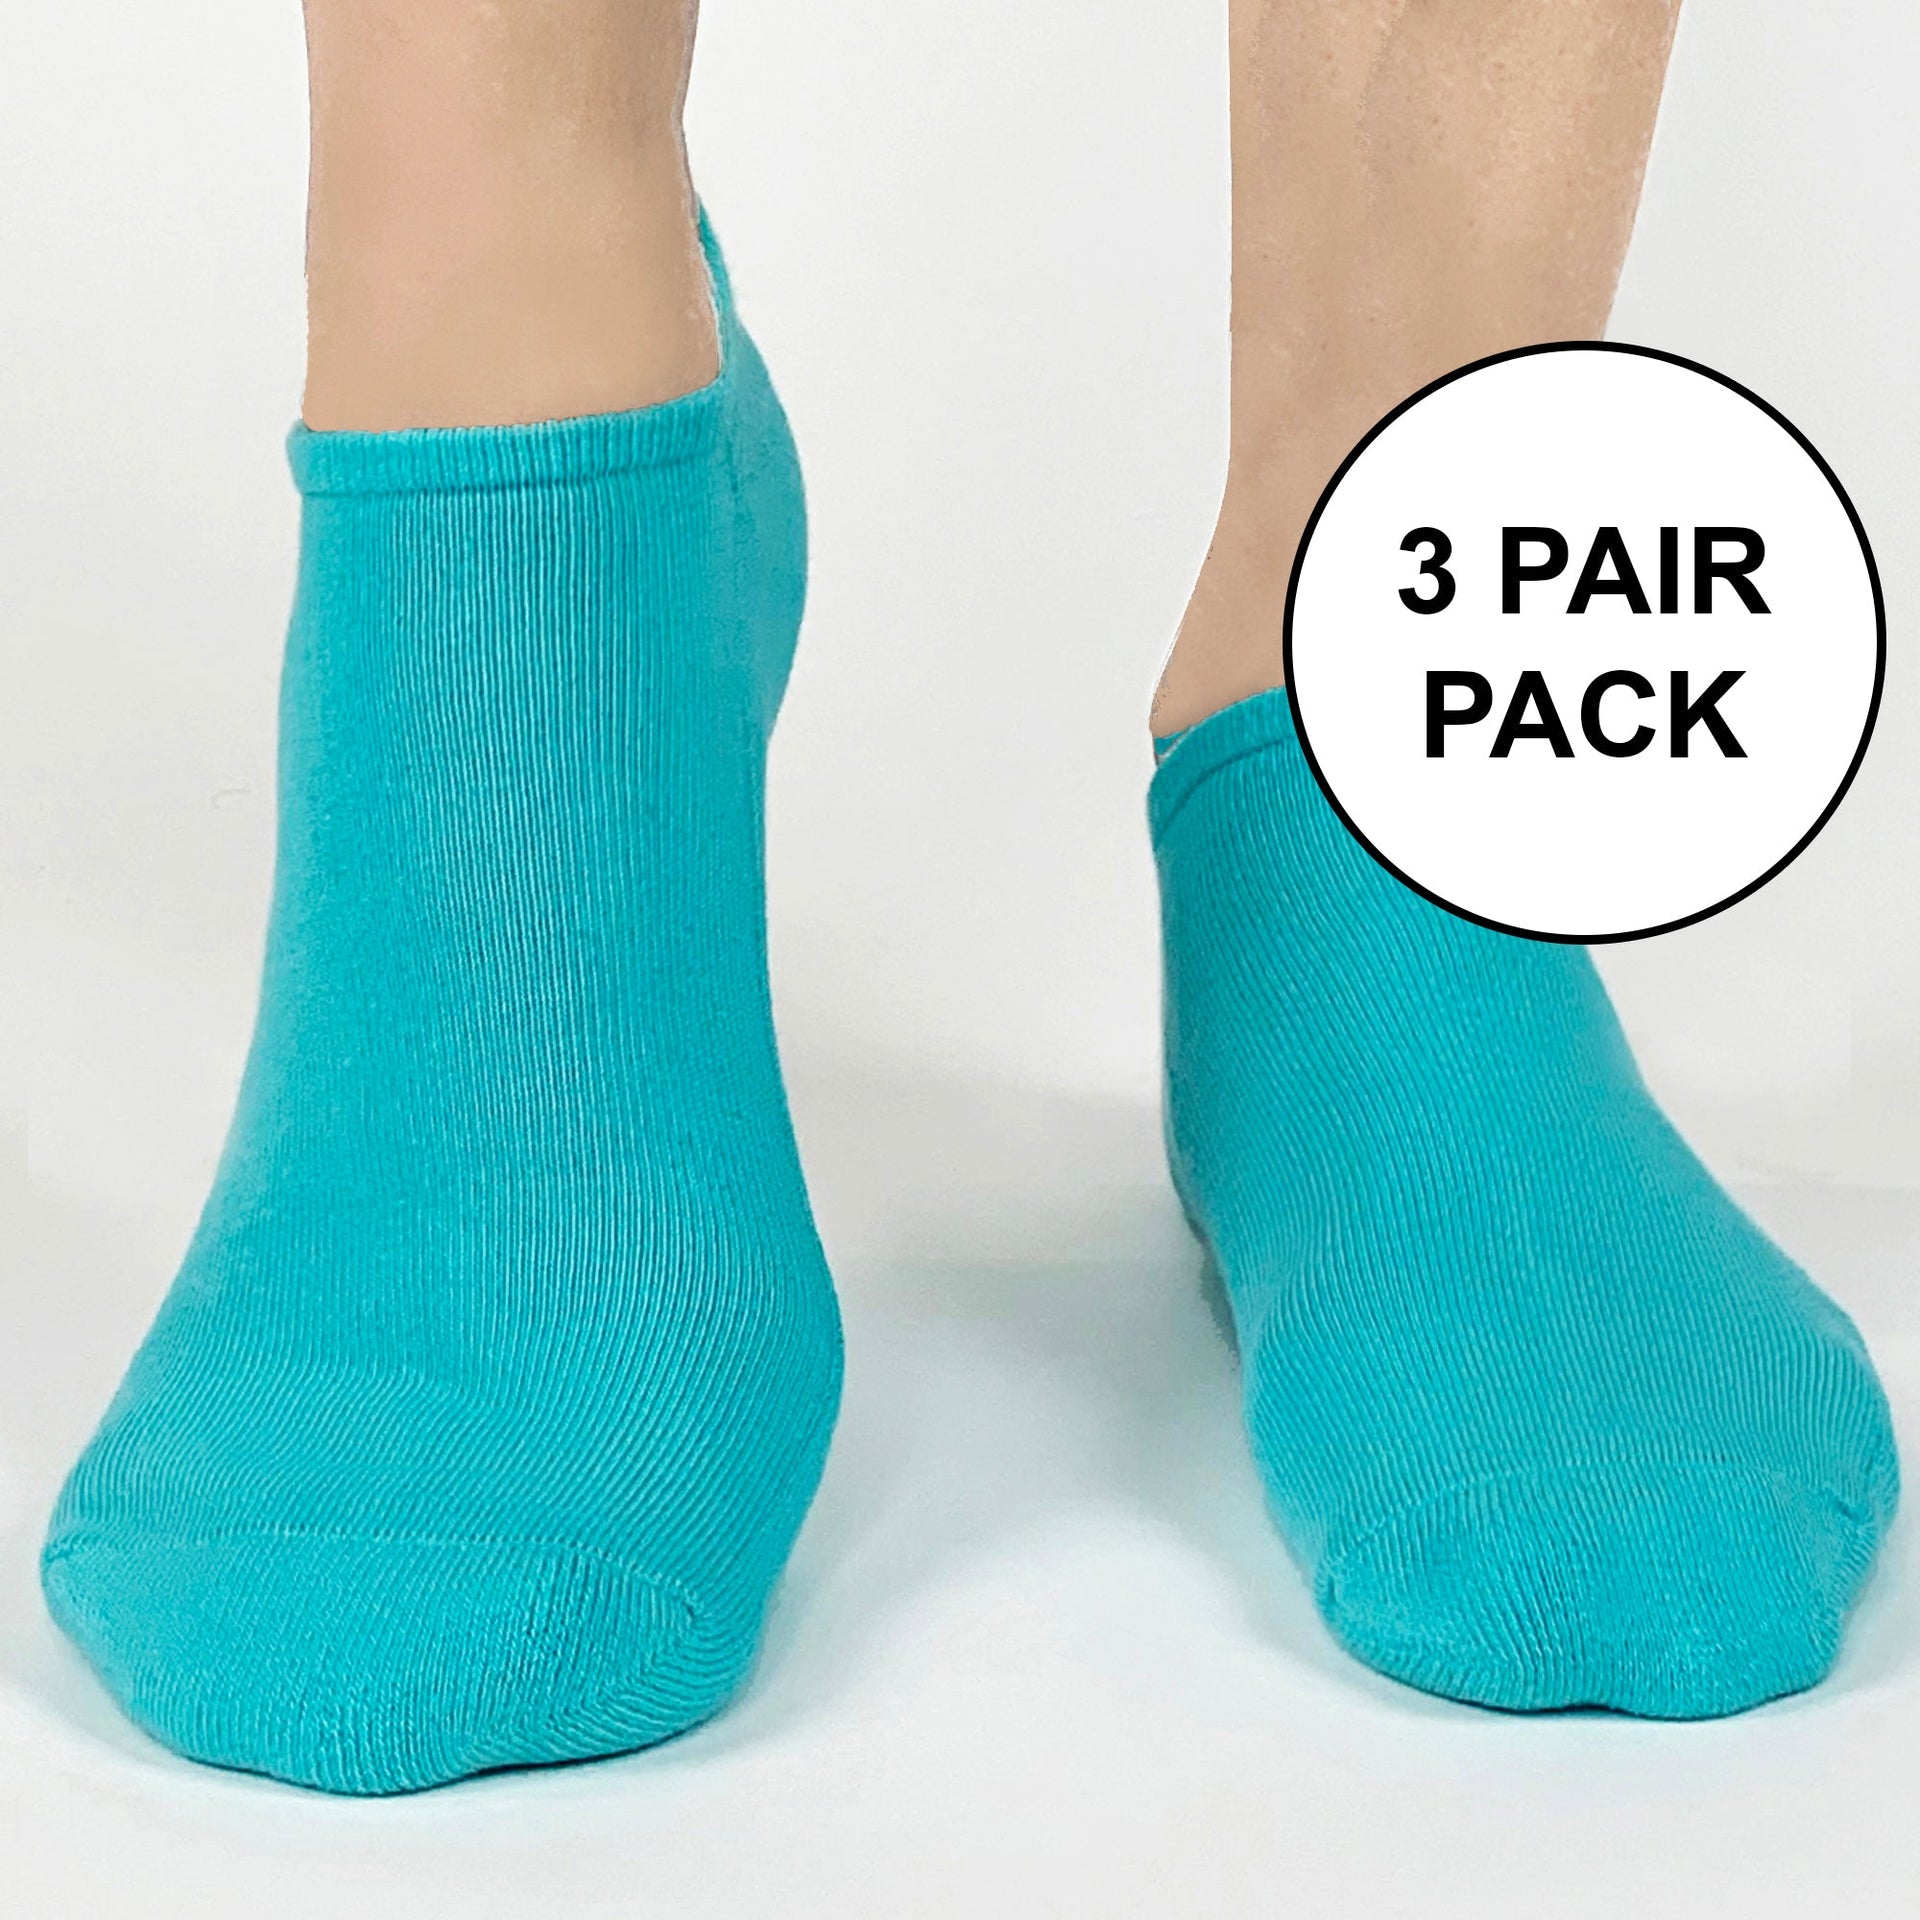 Super soft turquoise cotton blend no show socks available in three sizes sold as a three pair pack in same size and color.